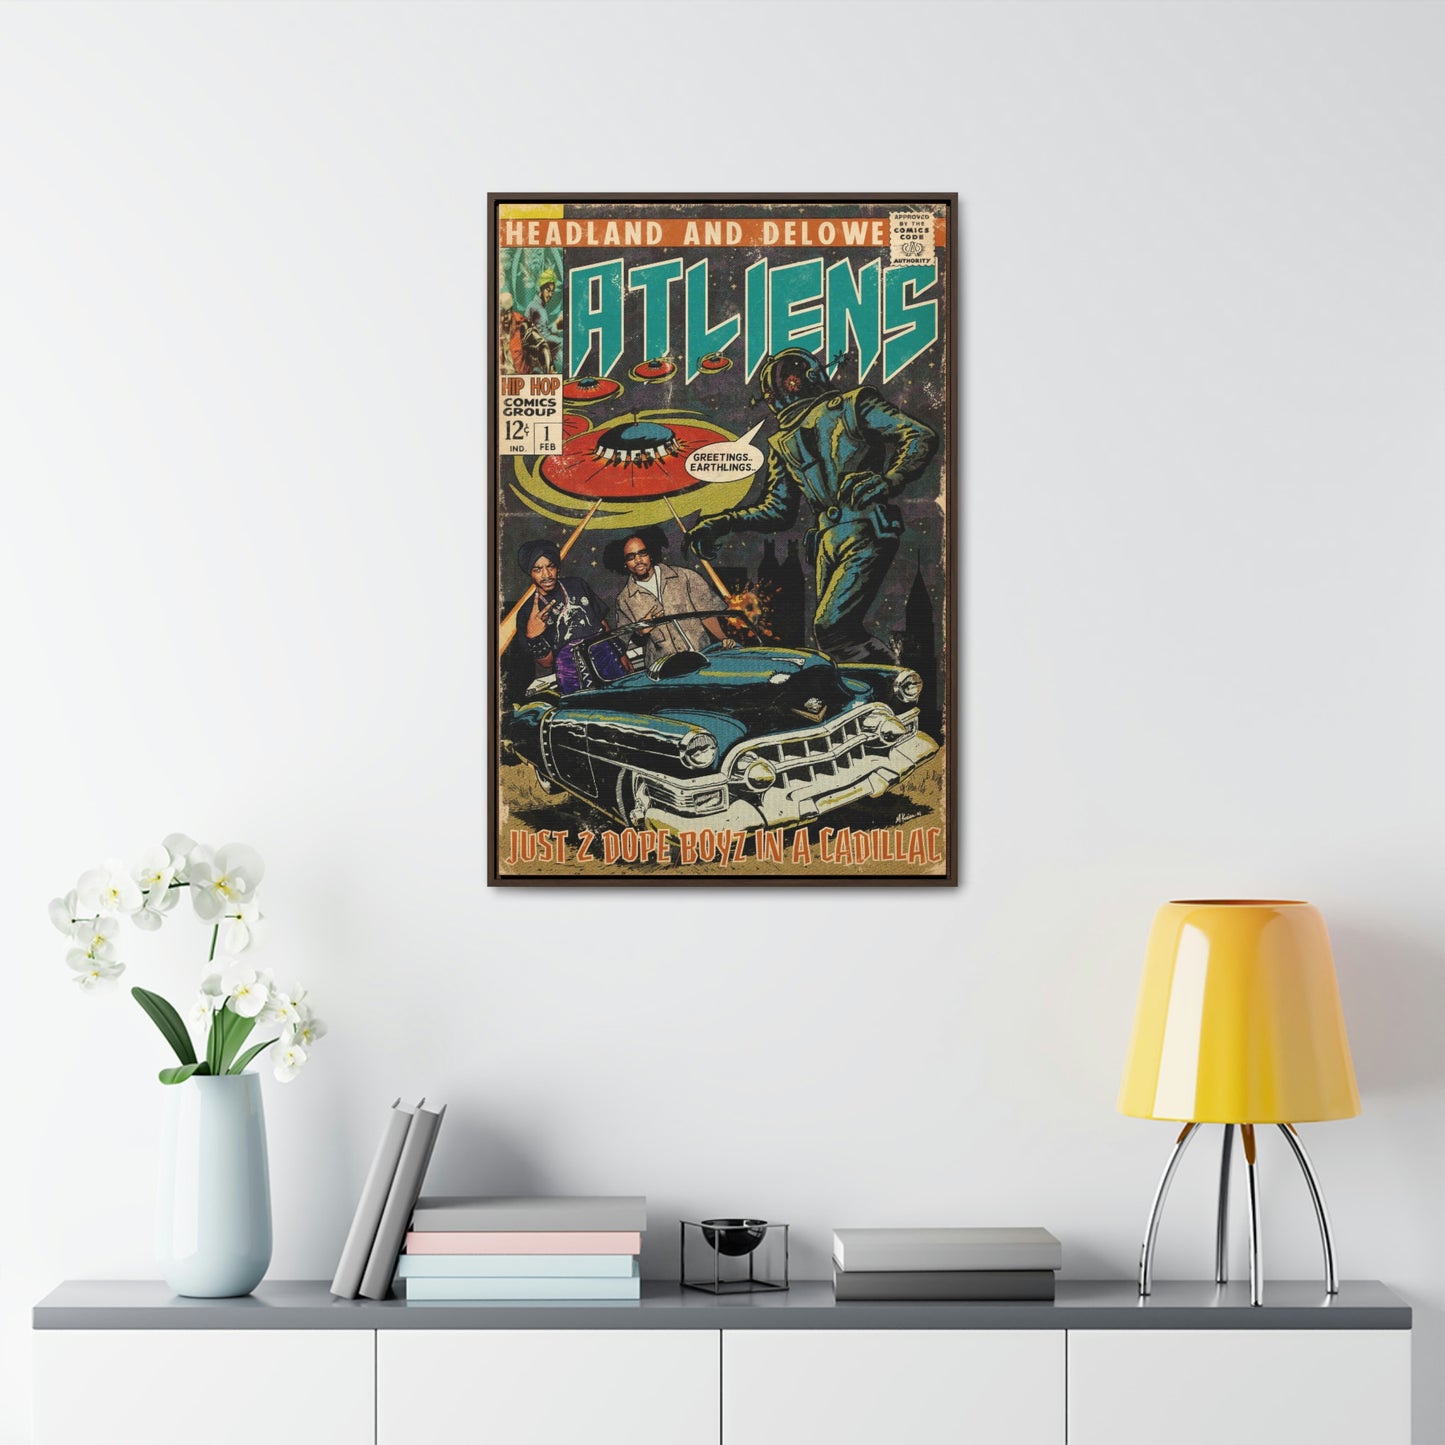 OutKast - 2 Dope Boyz - Atliens - Gallery Canvas Wraps, Vertical Frame